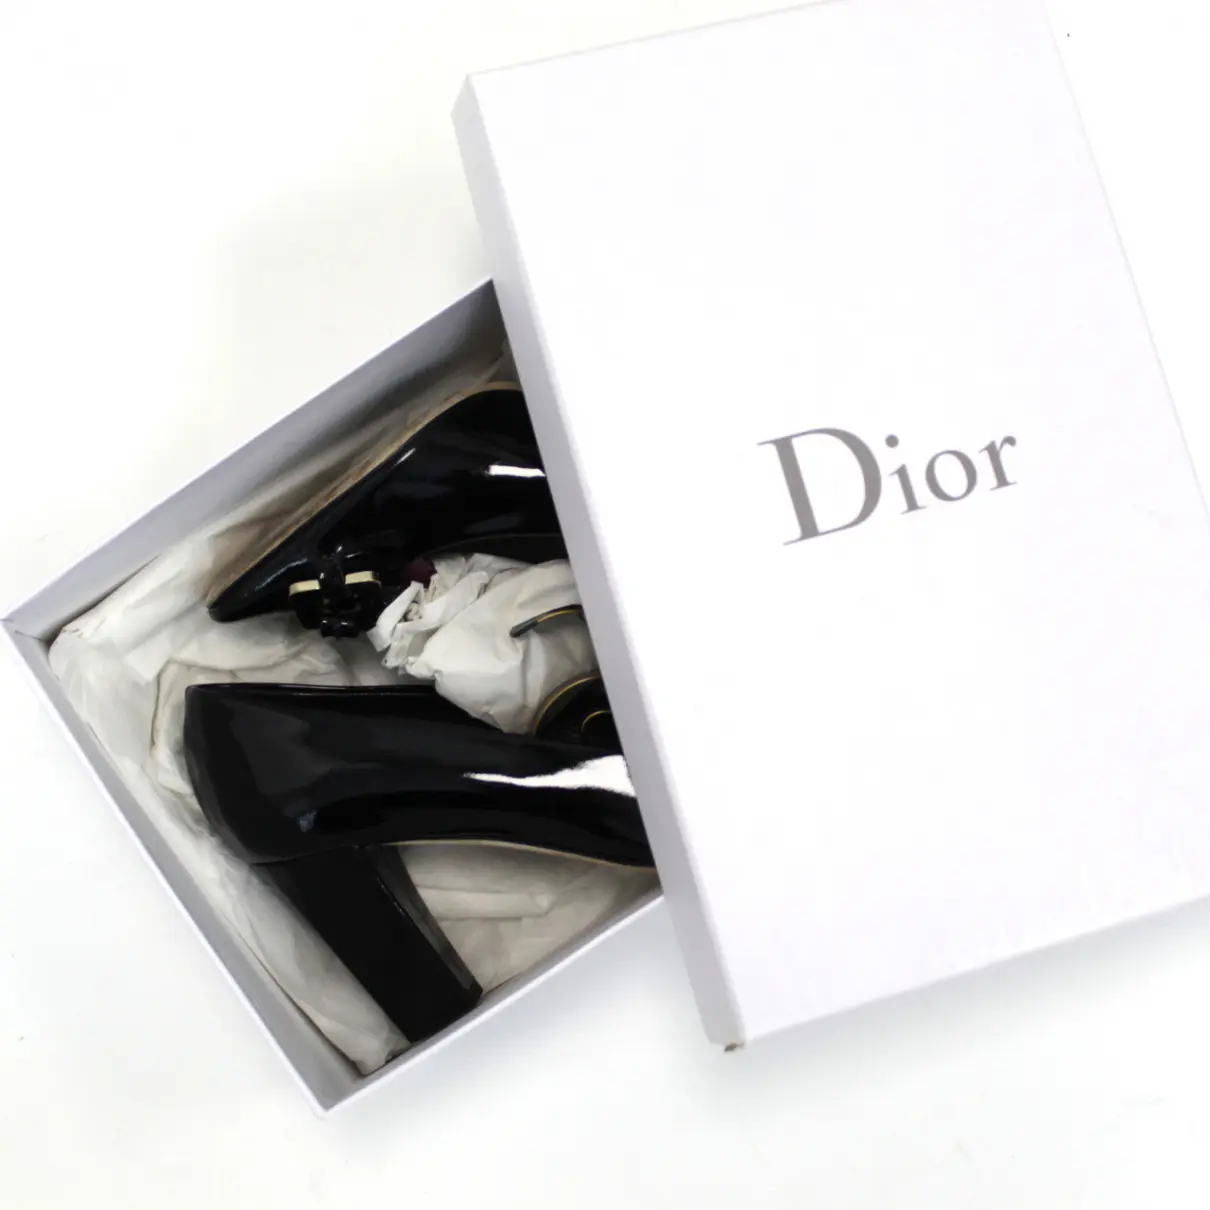 Patent leather heels Dior